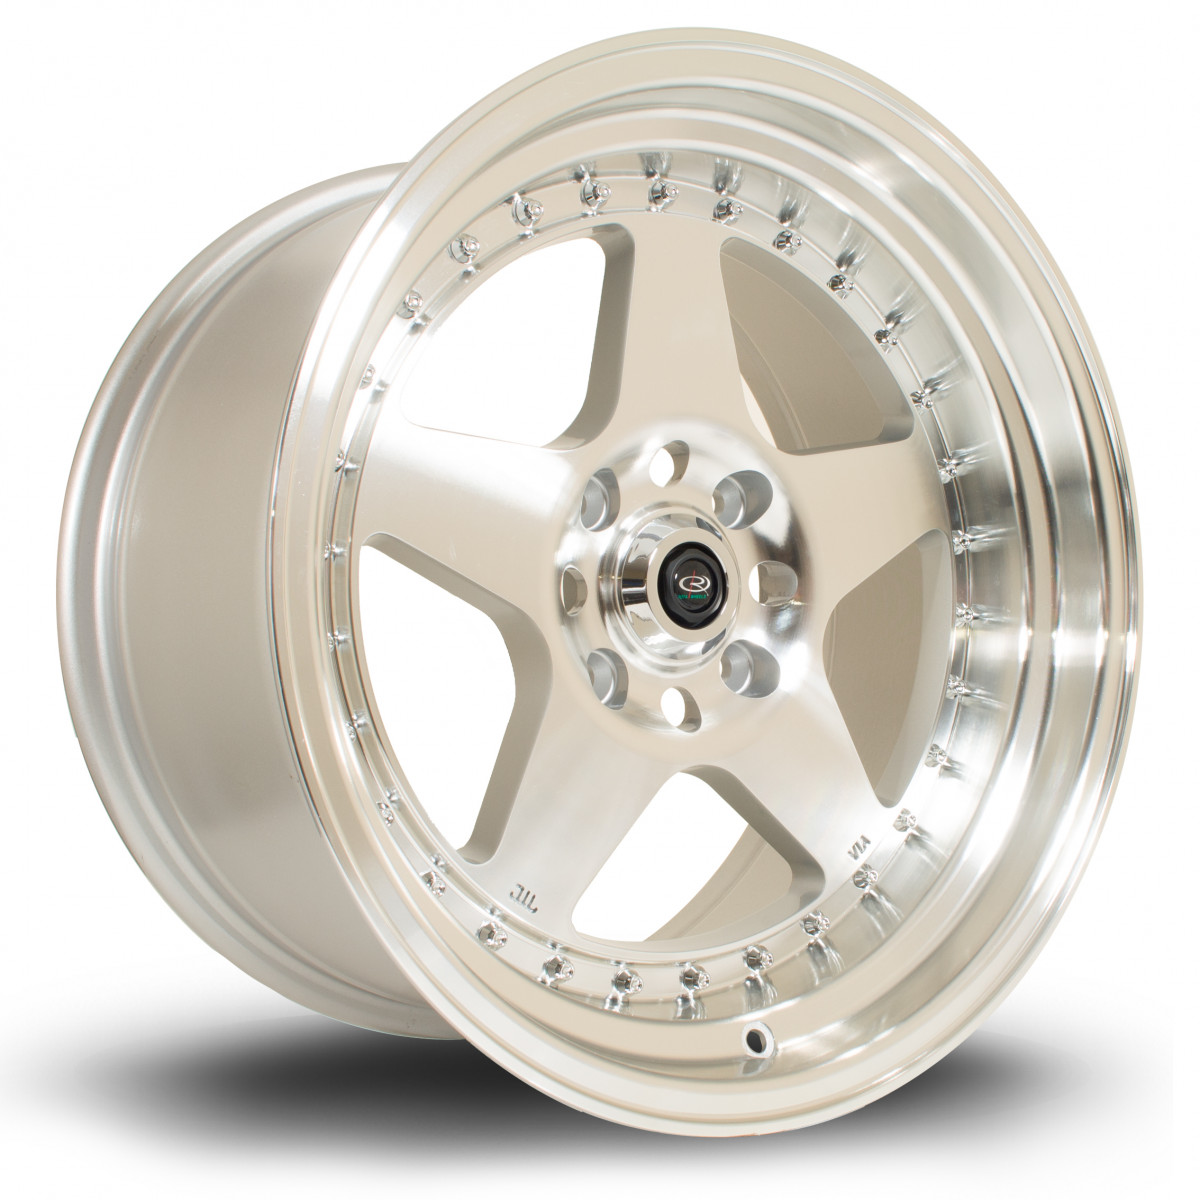 Kyusha 17x9.5 5x114 ET0 Silver with Polished Face